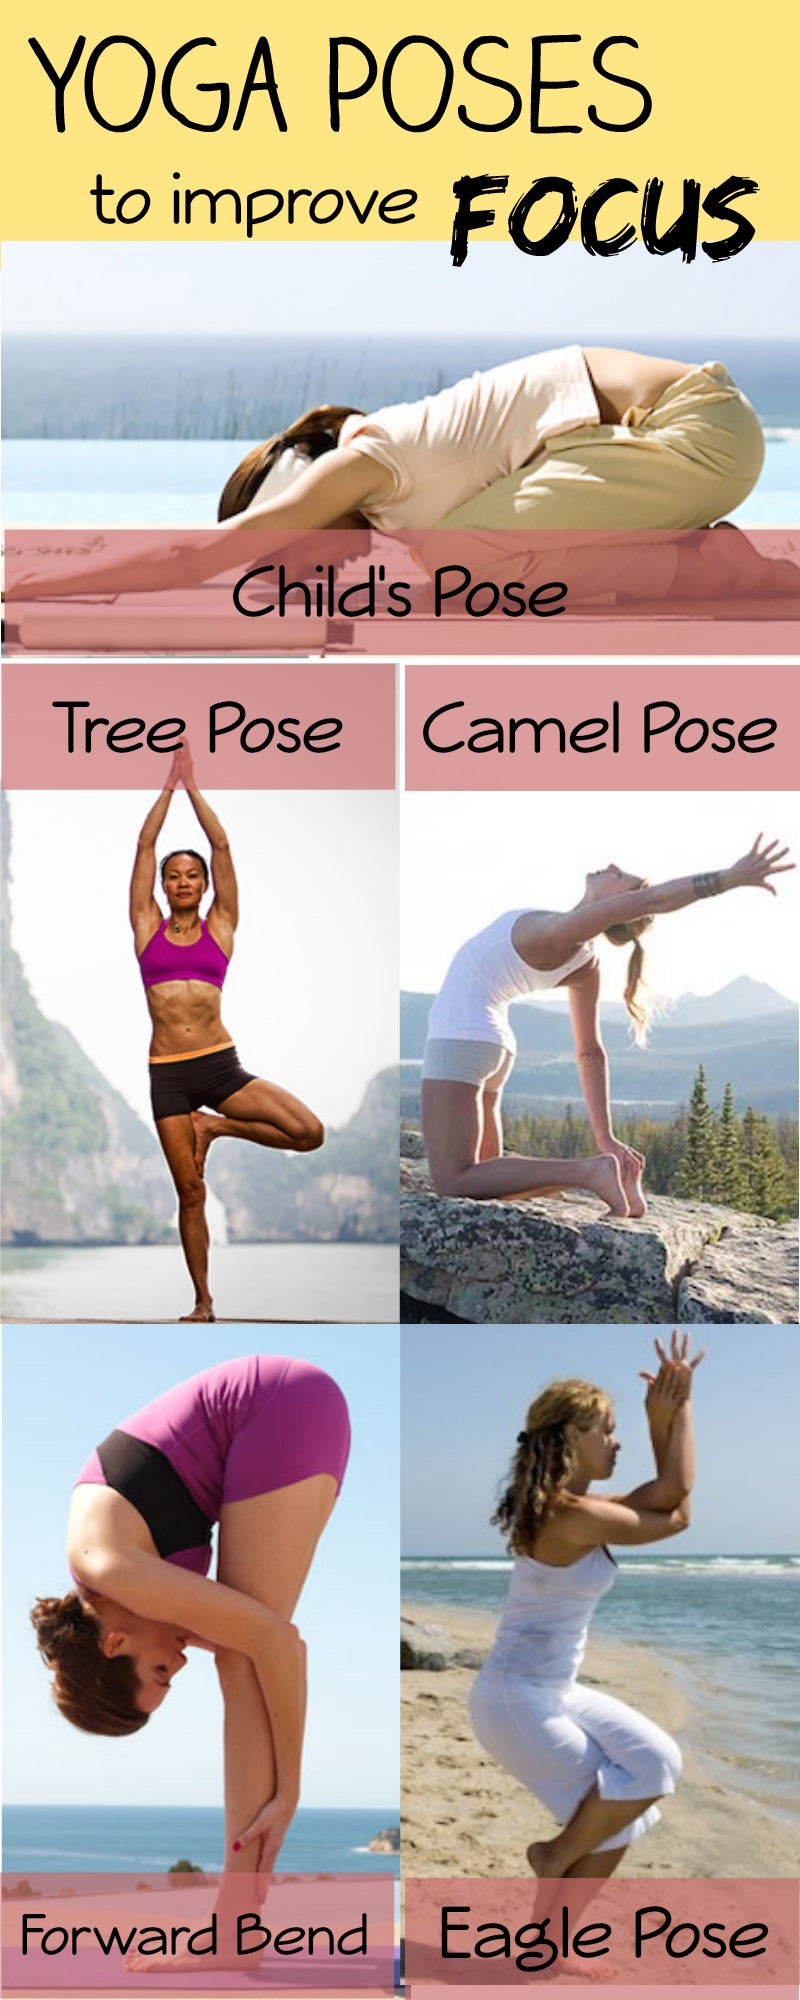 6 Best Yoga Poses To Soothe Menopause Symptoms | Prevention